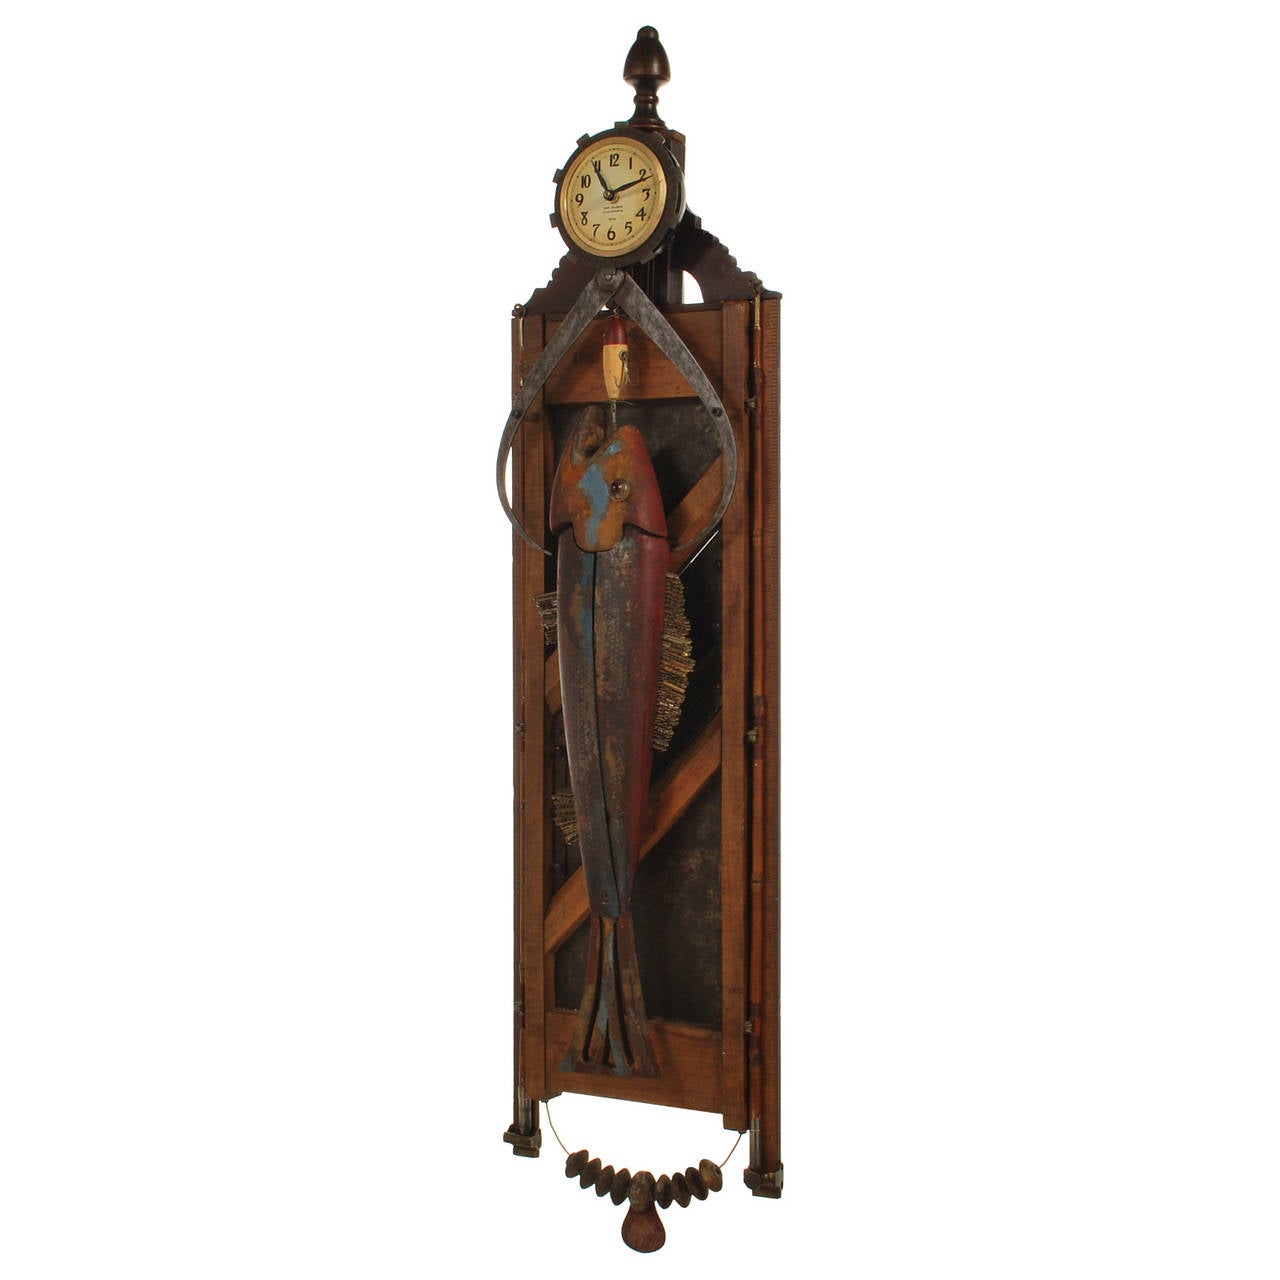 This incredible piece of Folk Art is made from a collection of antique and vintage found objects. It features a beautiful 23.5